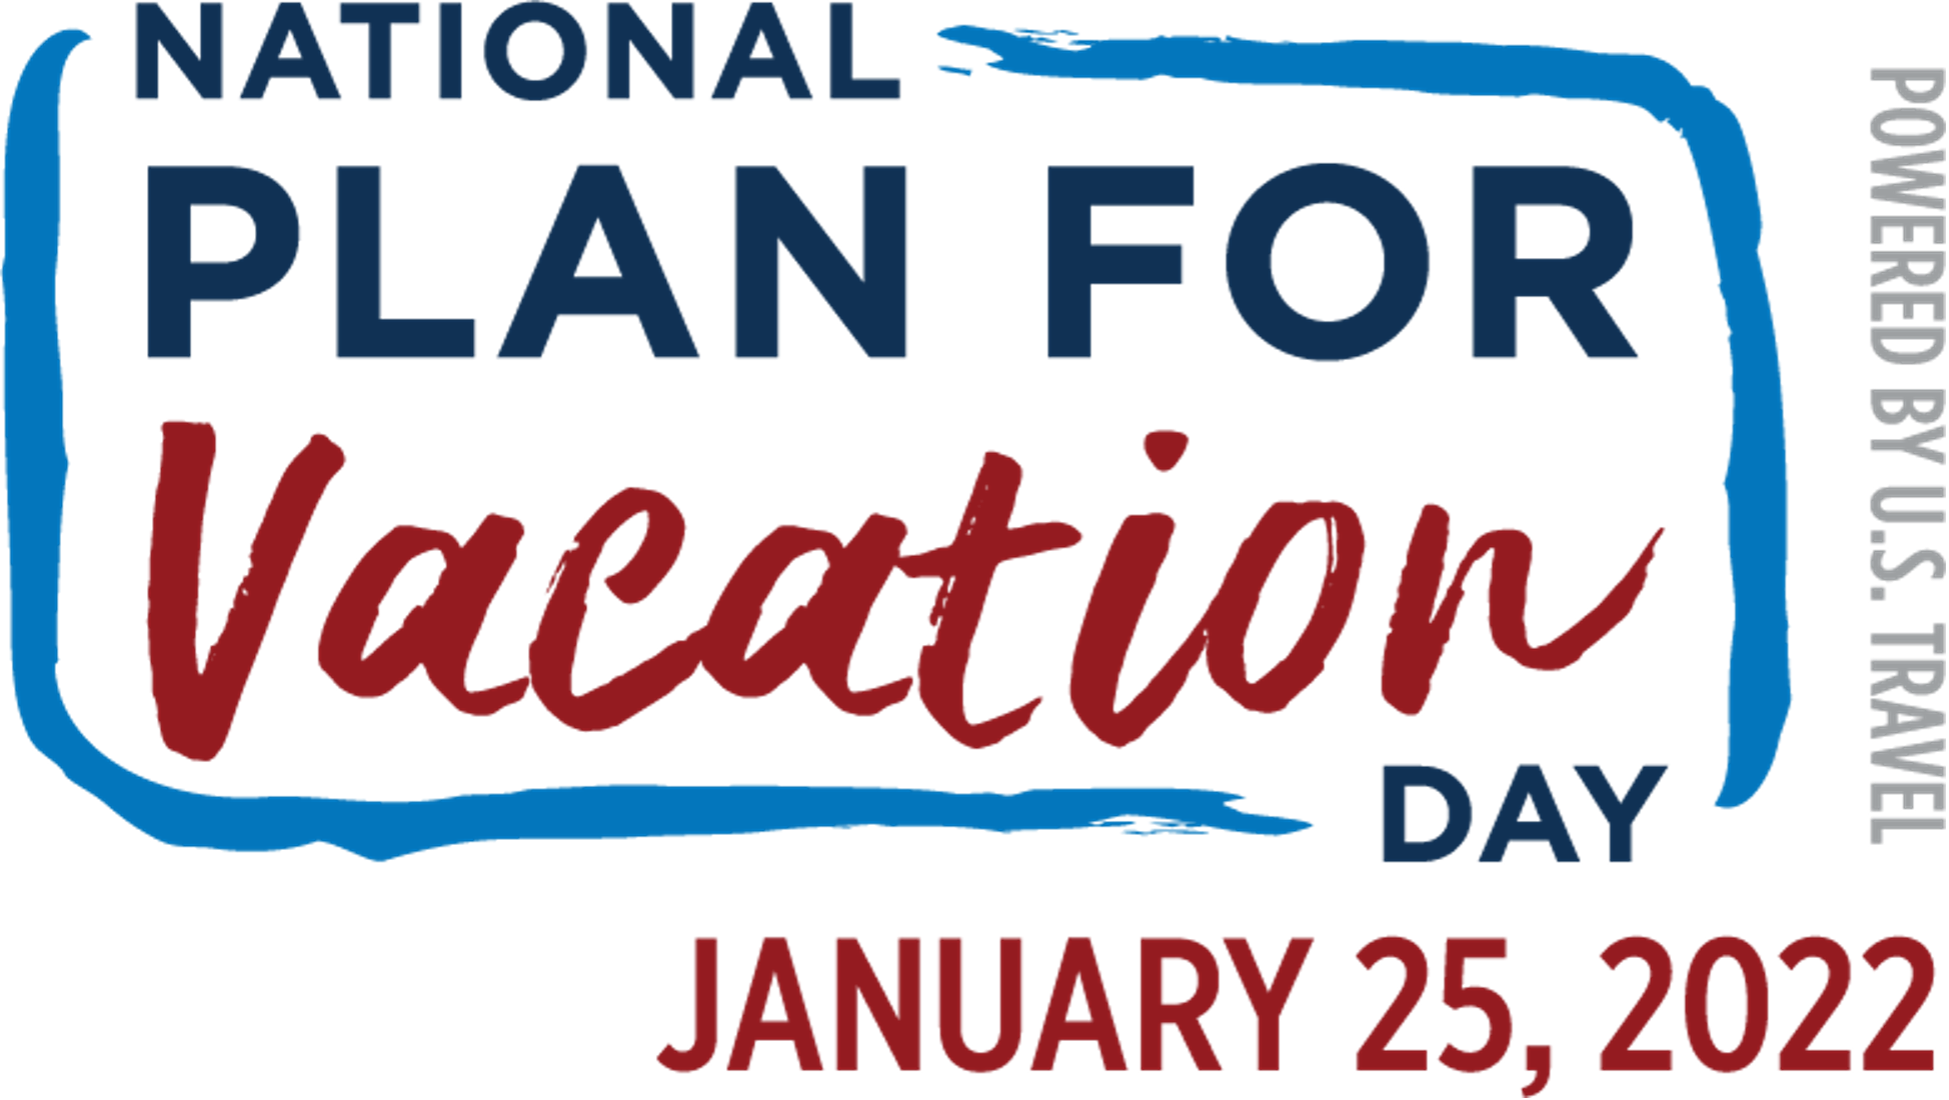 Celebrate National Plan for Vacation Day